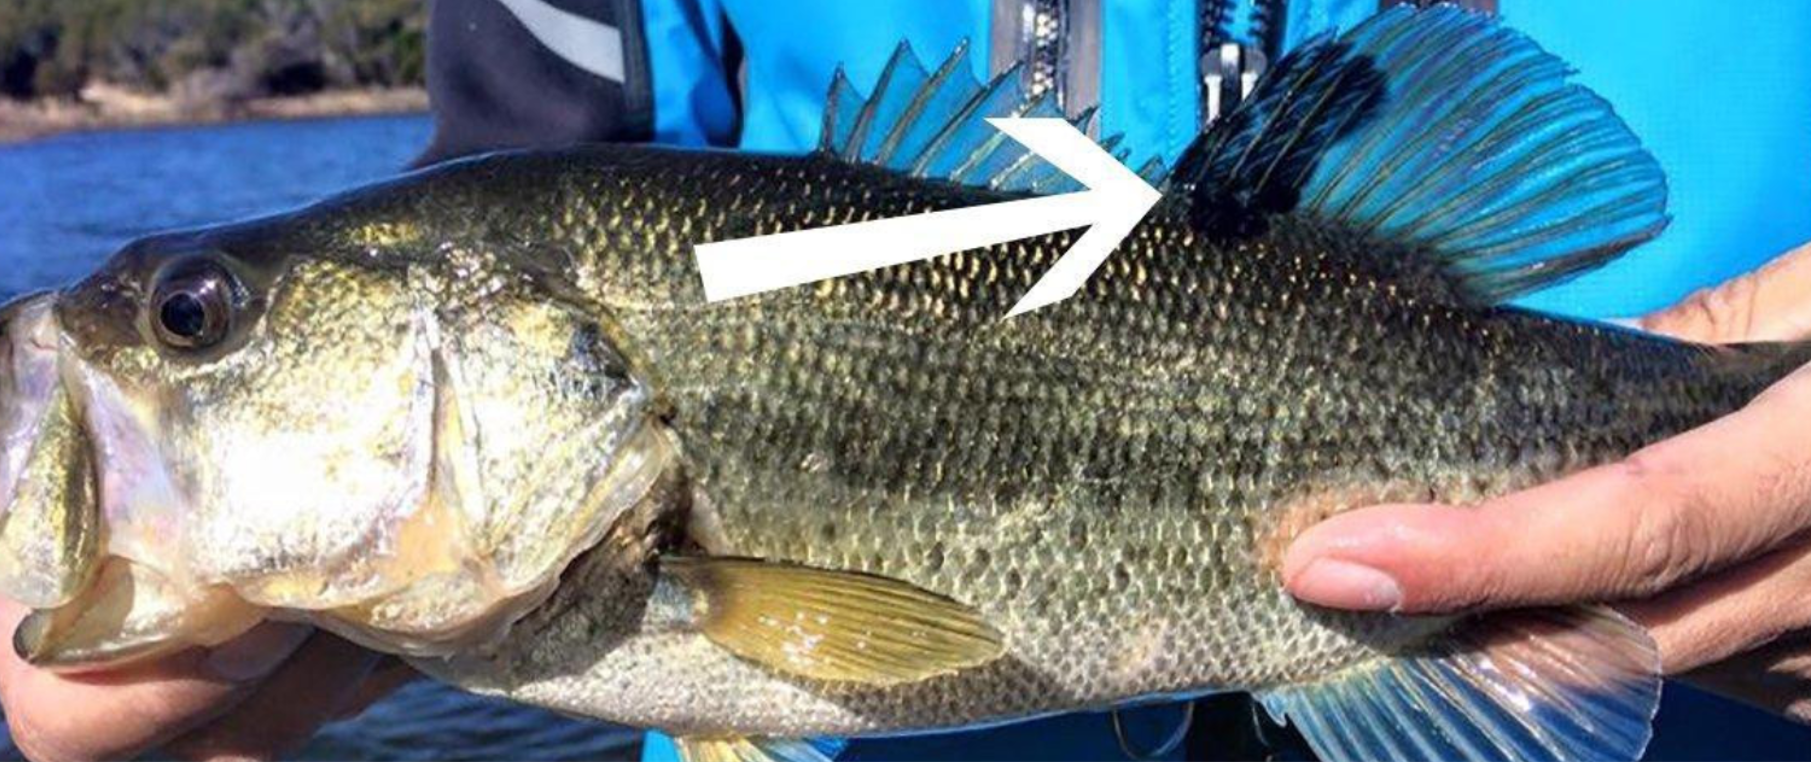 Primary Image of a melanoma on a bass fish